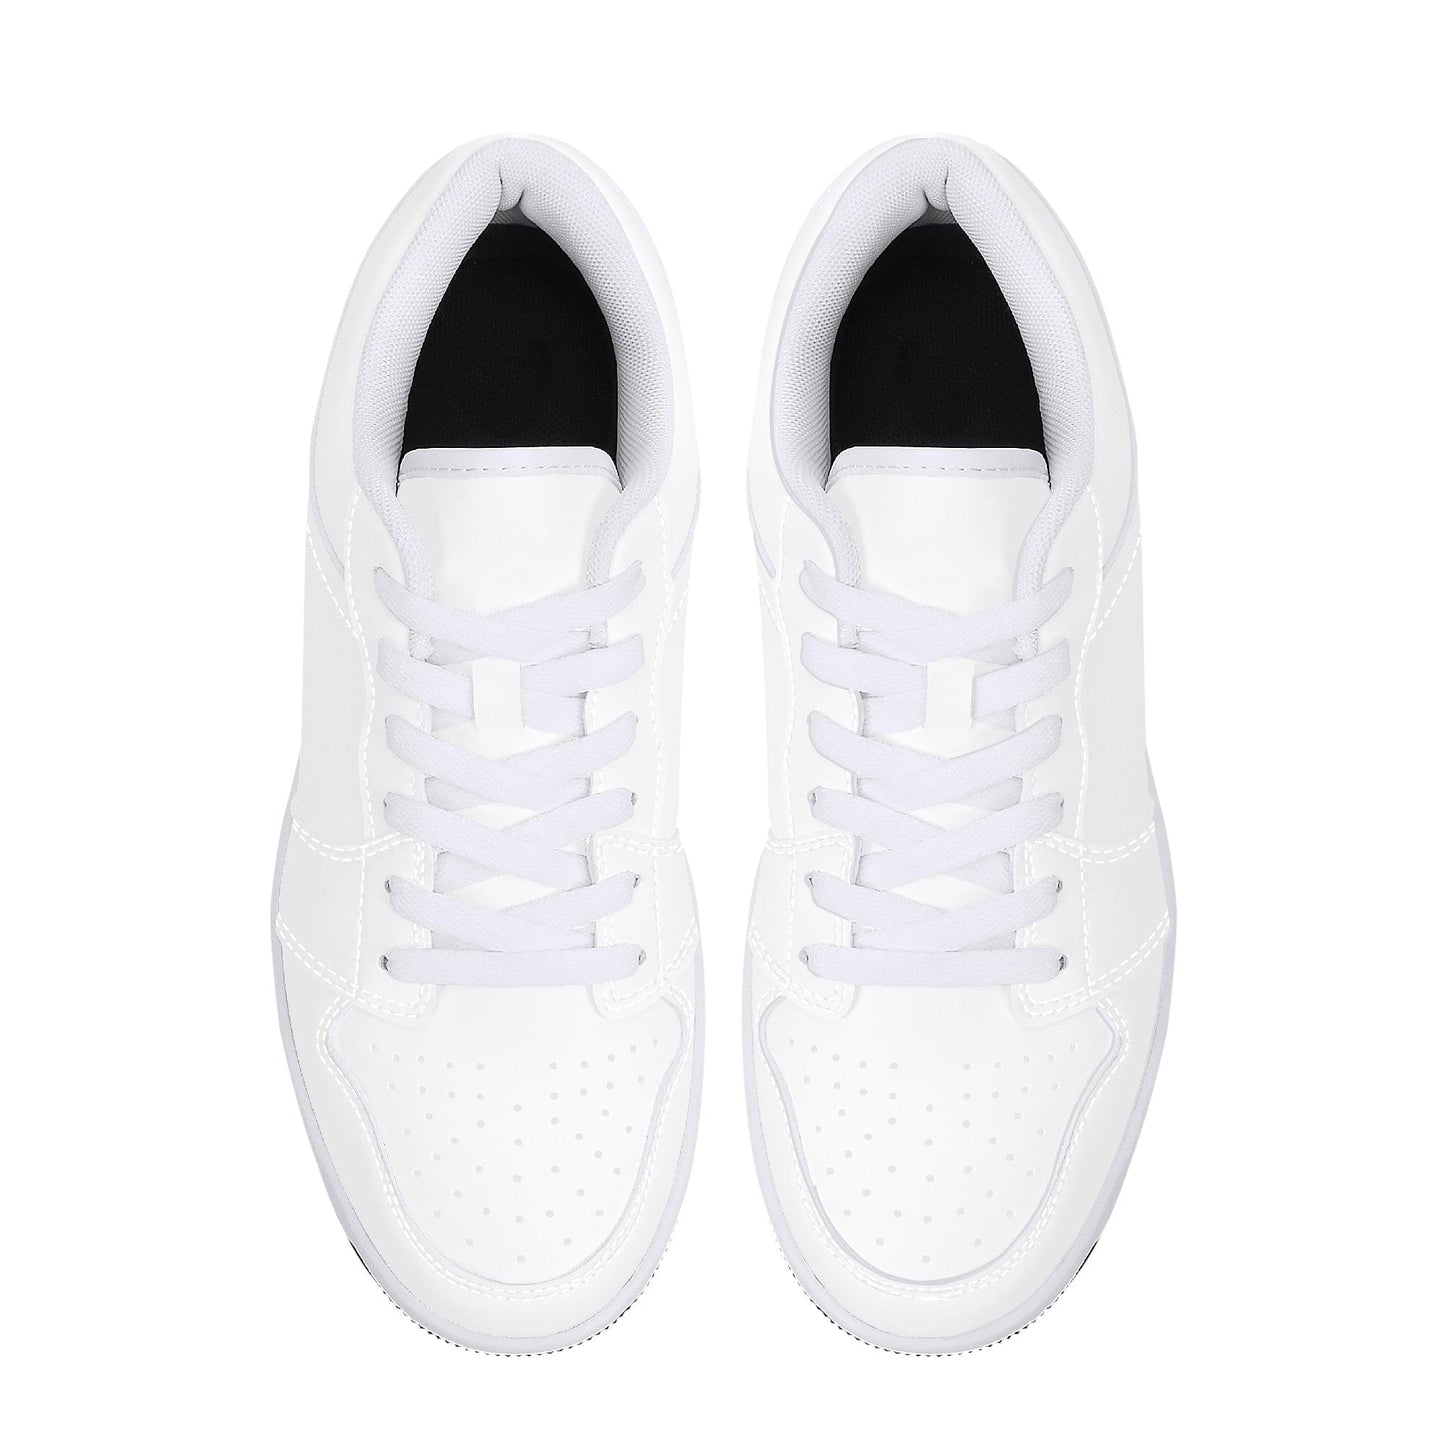 Custom Low Top Leather Sneakers -White D15 Colloid Colors 